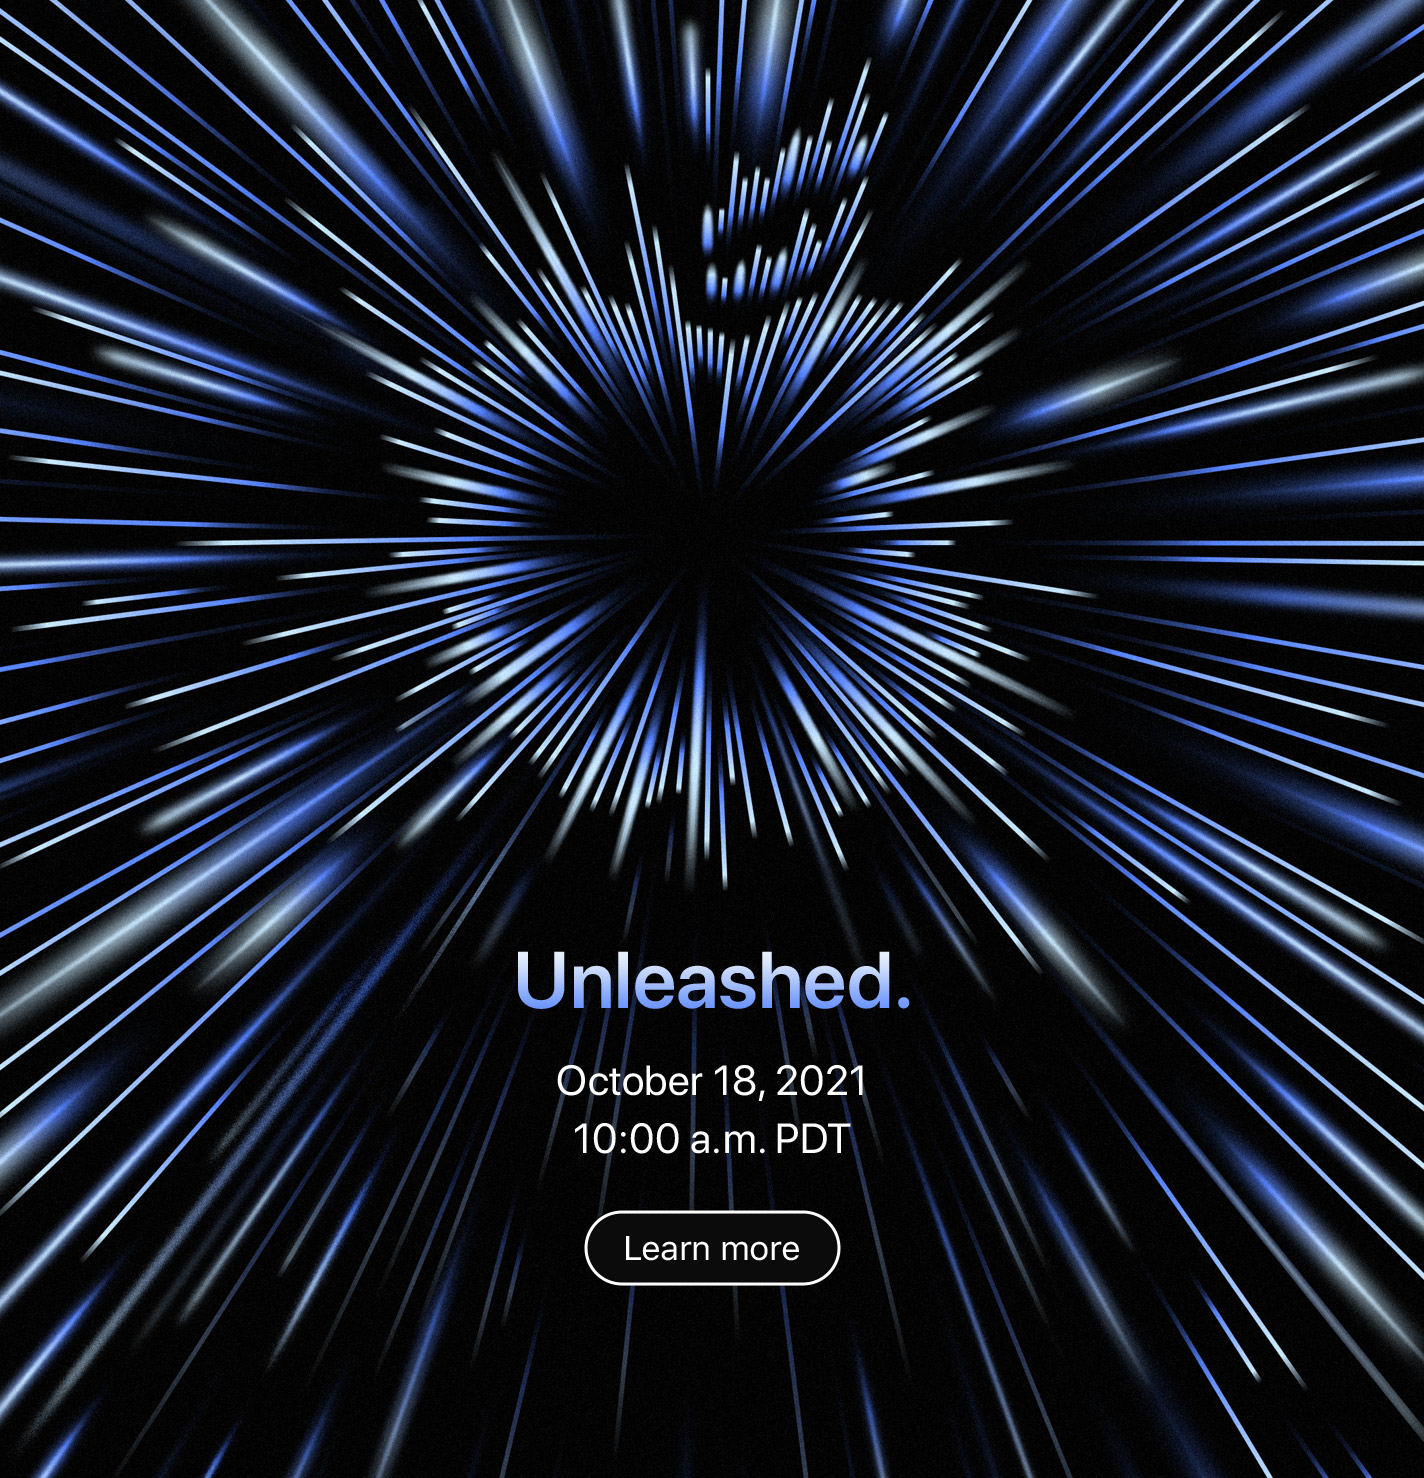 Unleashed.  October 18, 2021  10:00 a.m. PDT  Learn more